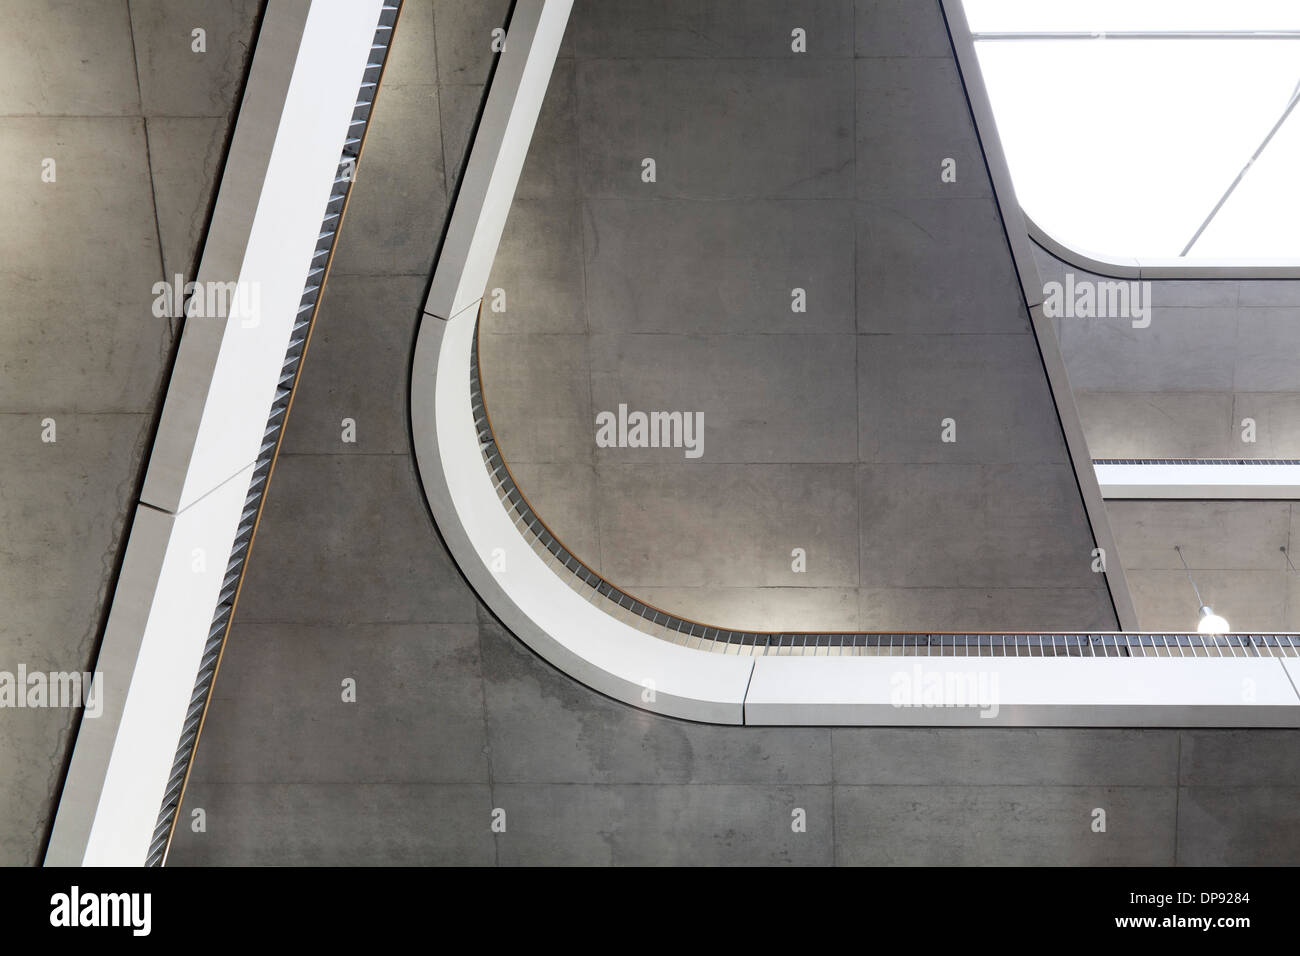 City of Westminster College, staircase detail, London, UK. Stock Photo